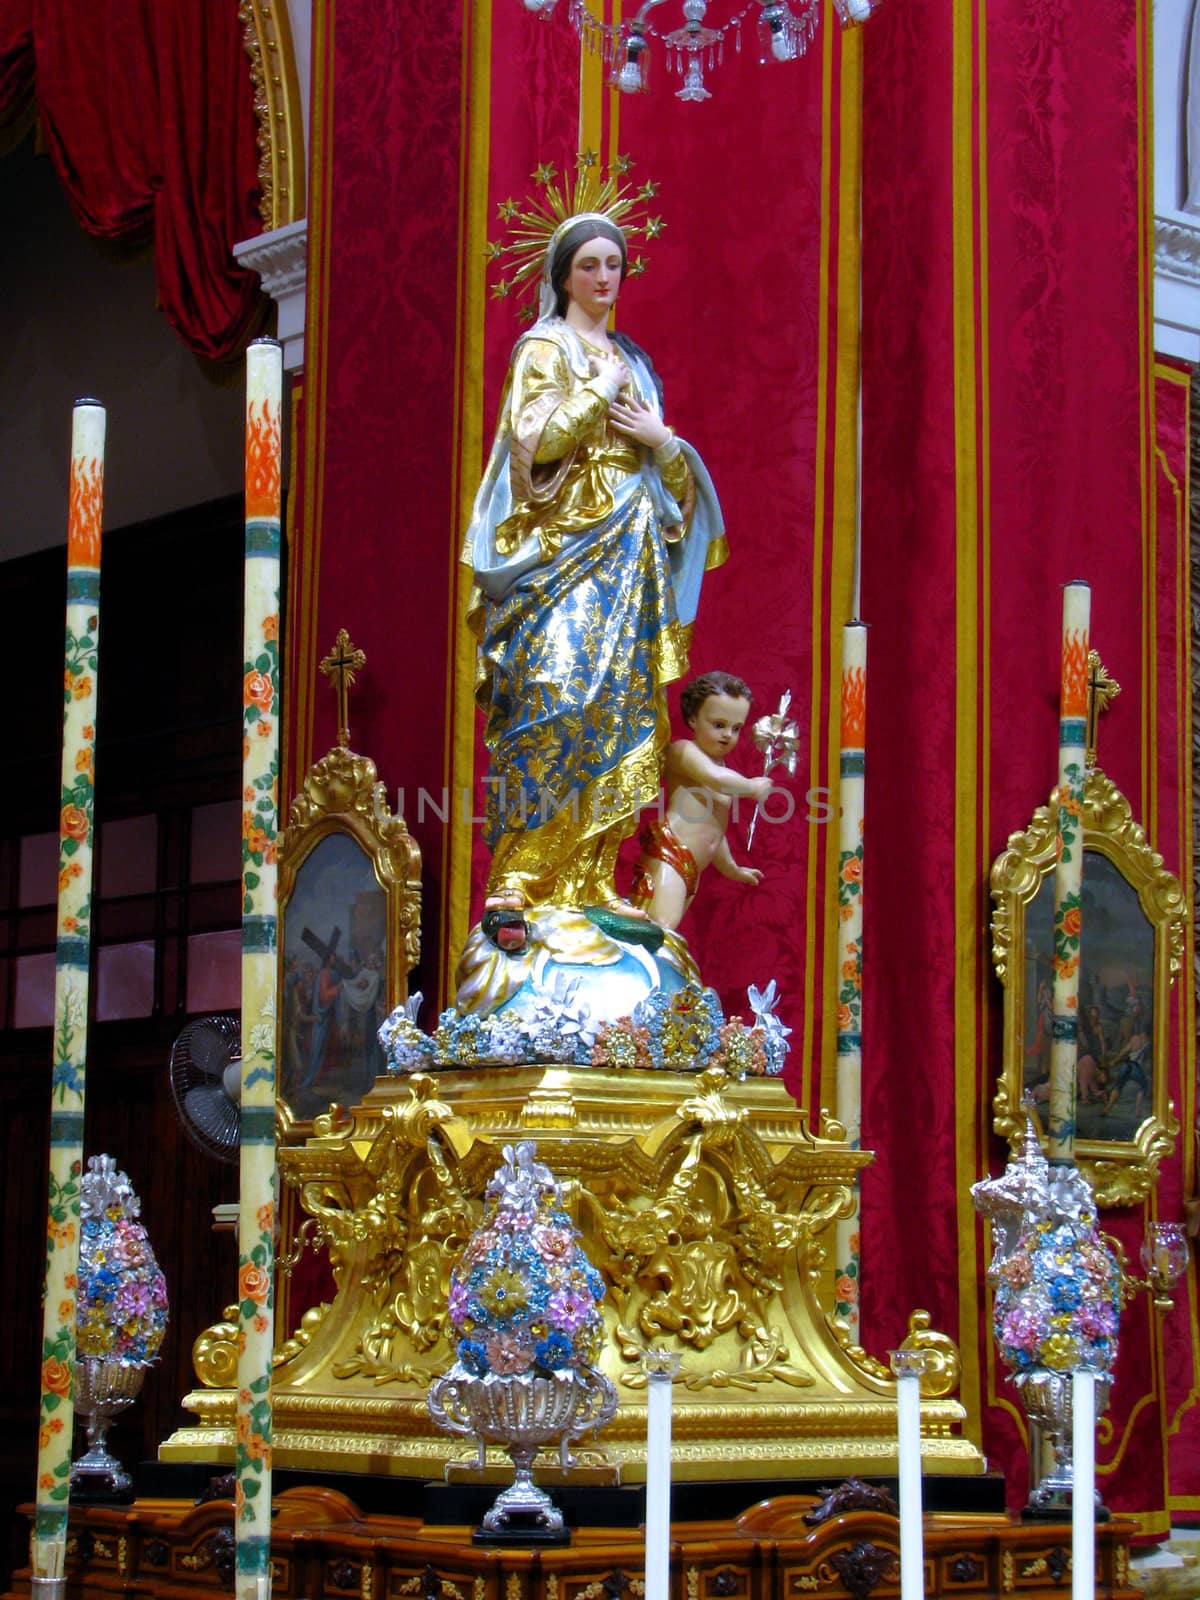 The statue of Our Lady of The Lilies in Maqbba, Malta.